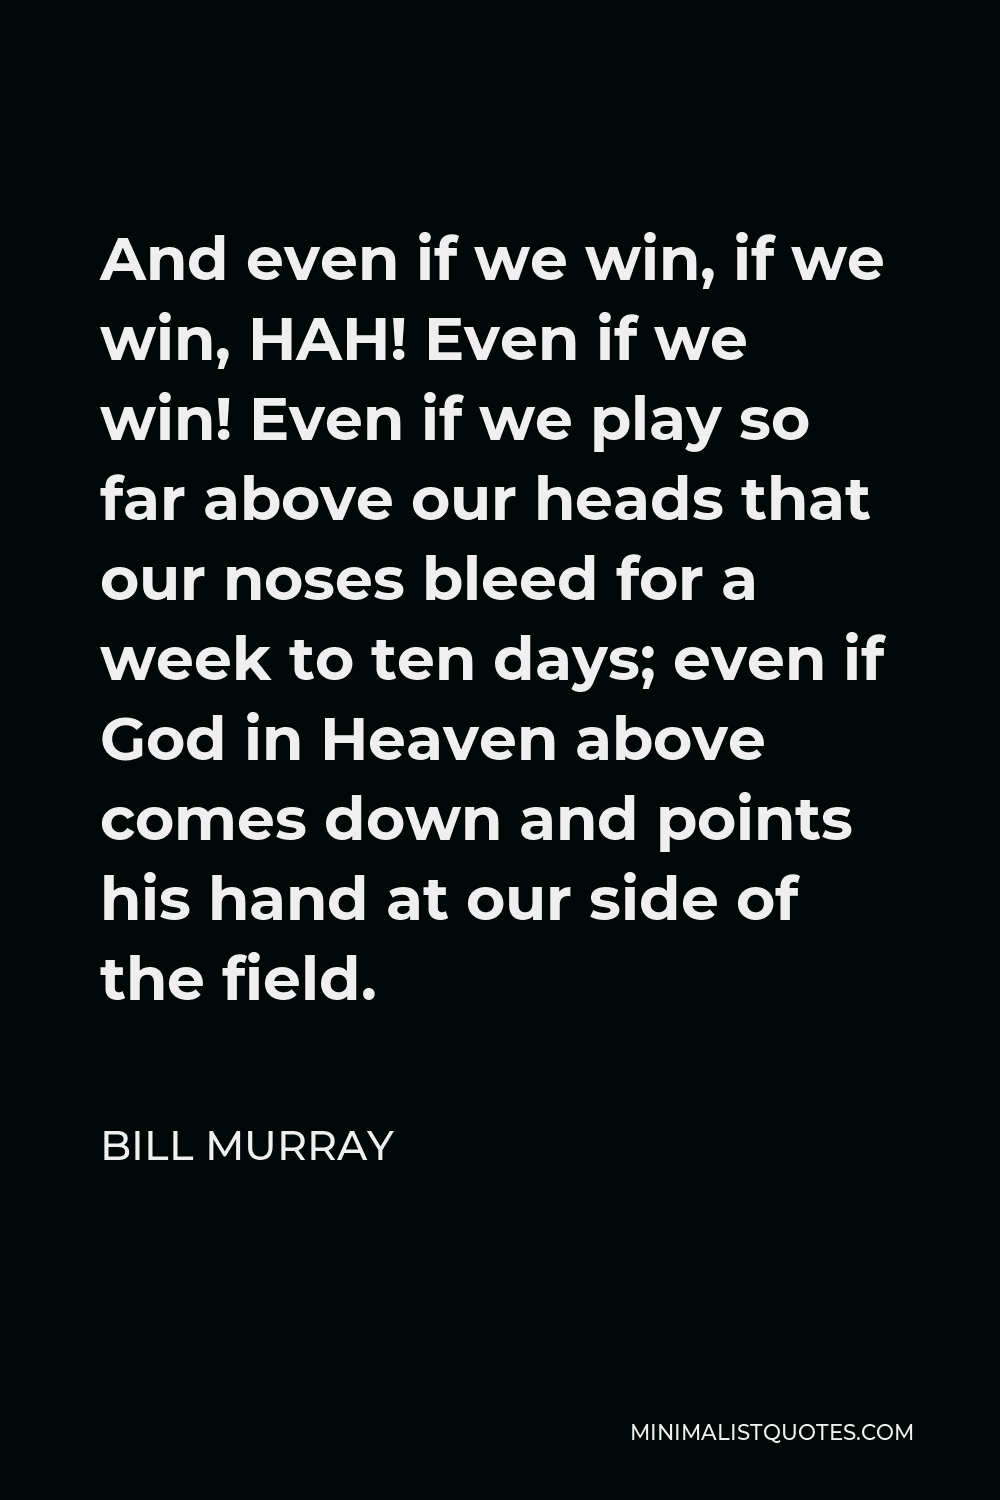 Bill Murray Quote - And even if we win, if we win, HAH! Even if we win! Even if we play so far above our heads that our noses bleed for a week to ten days; even if God in Heaven above comes down and points his hand at our side of the field.